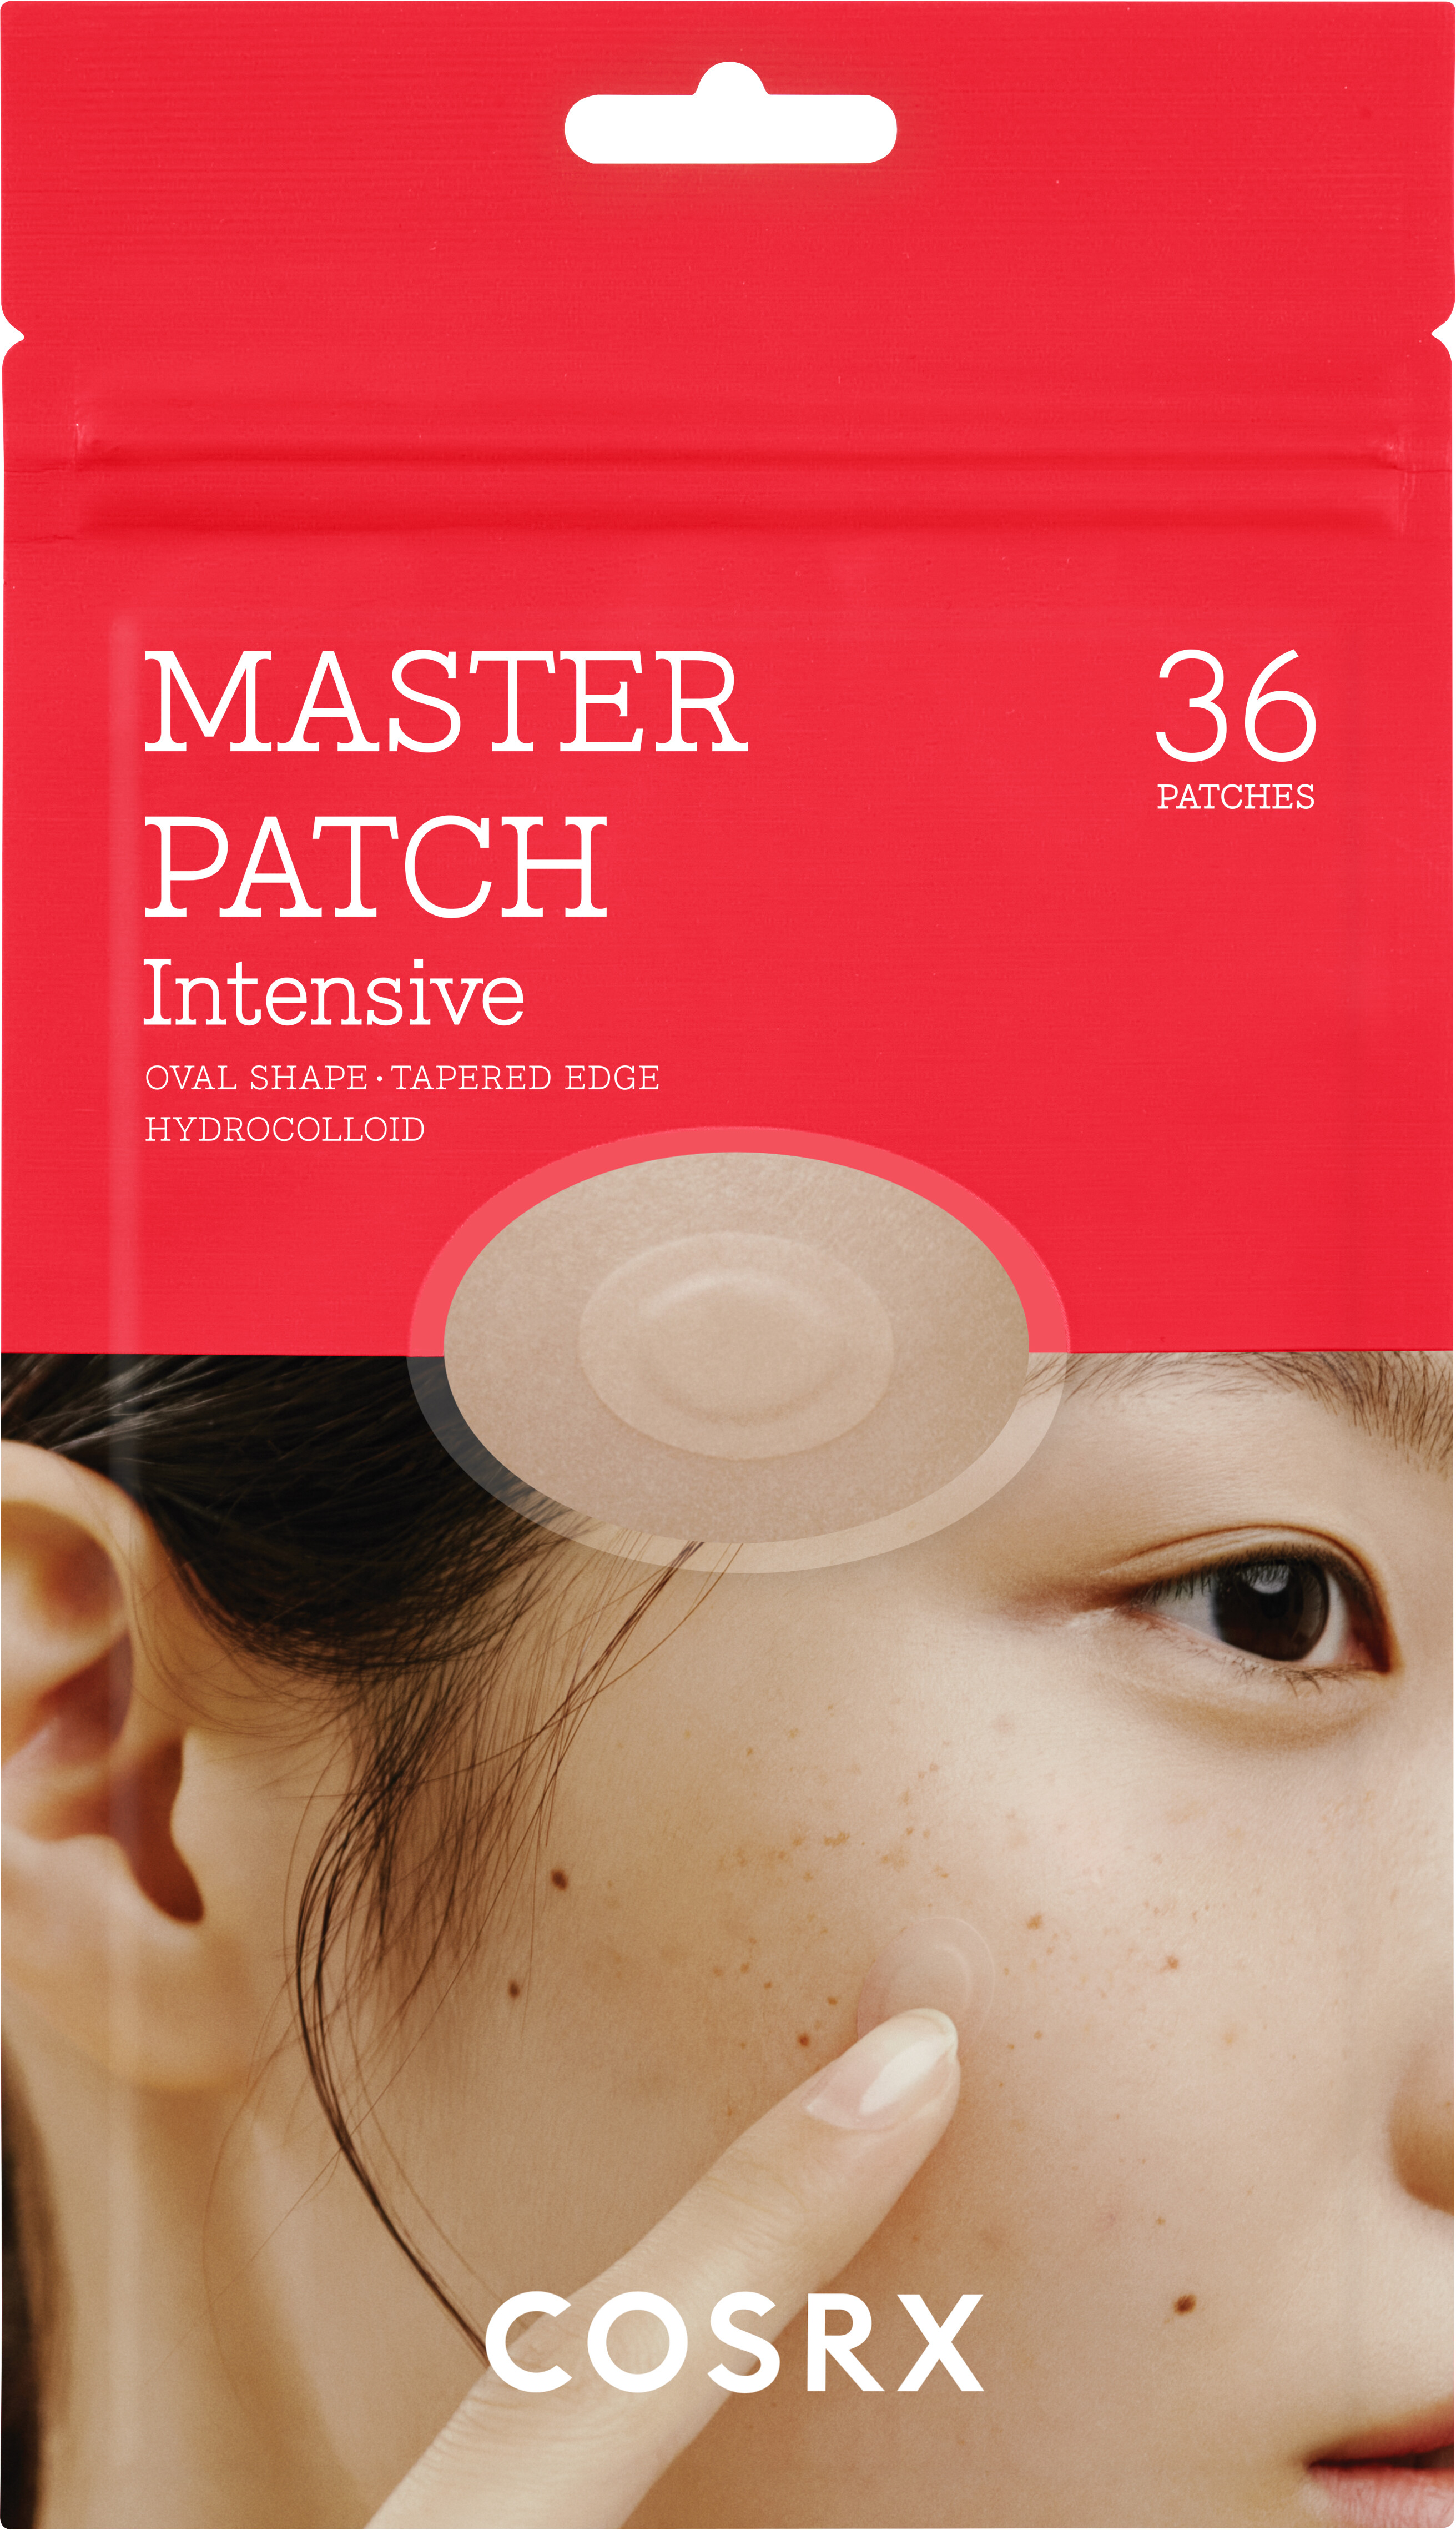 COSRX Master Patch Intensive Patches 36